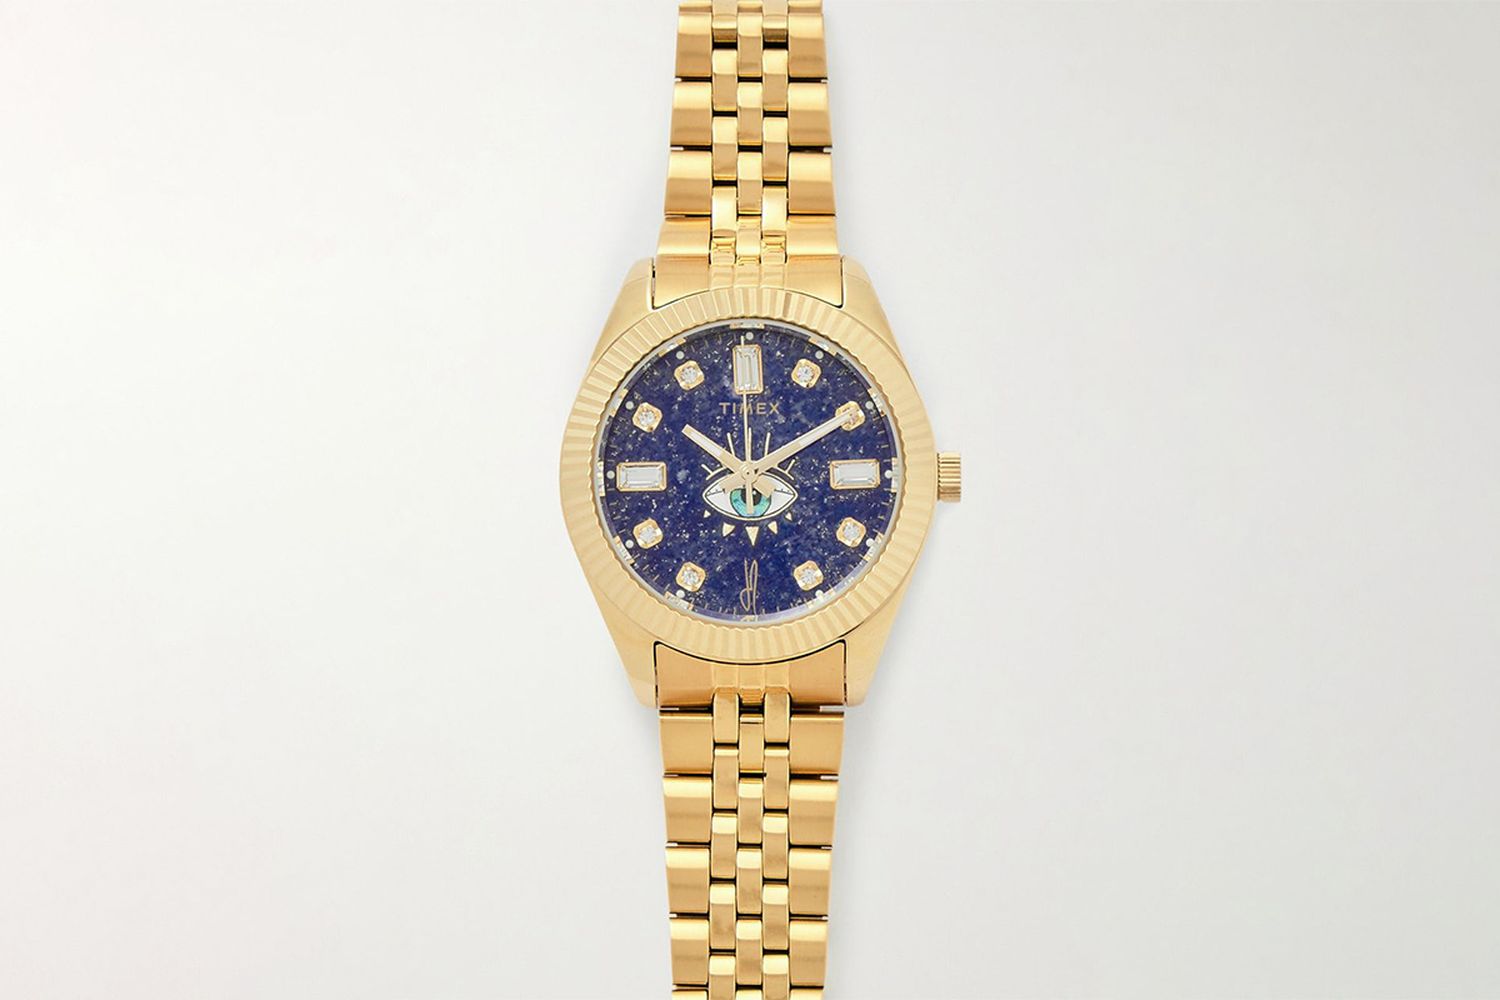 Jacquie Aiche 38mm Gold-Tone and Lapis Lazuli Watch